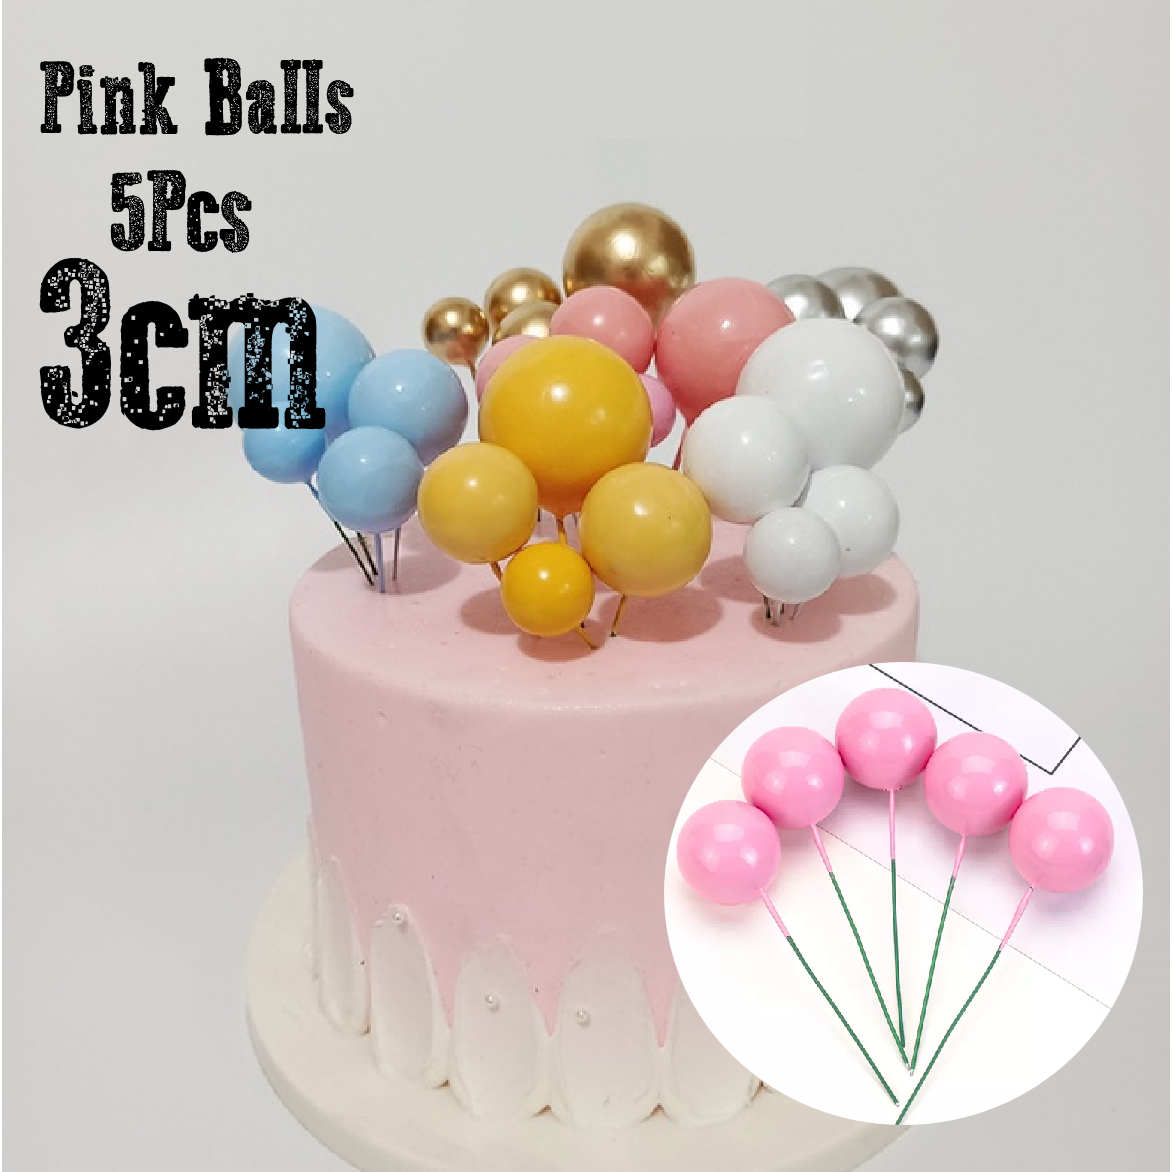 Cake Decoration Topper - 3 cm Pearl Balls - Pink, pack of 5 - Rampant Coffee Company